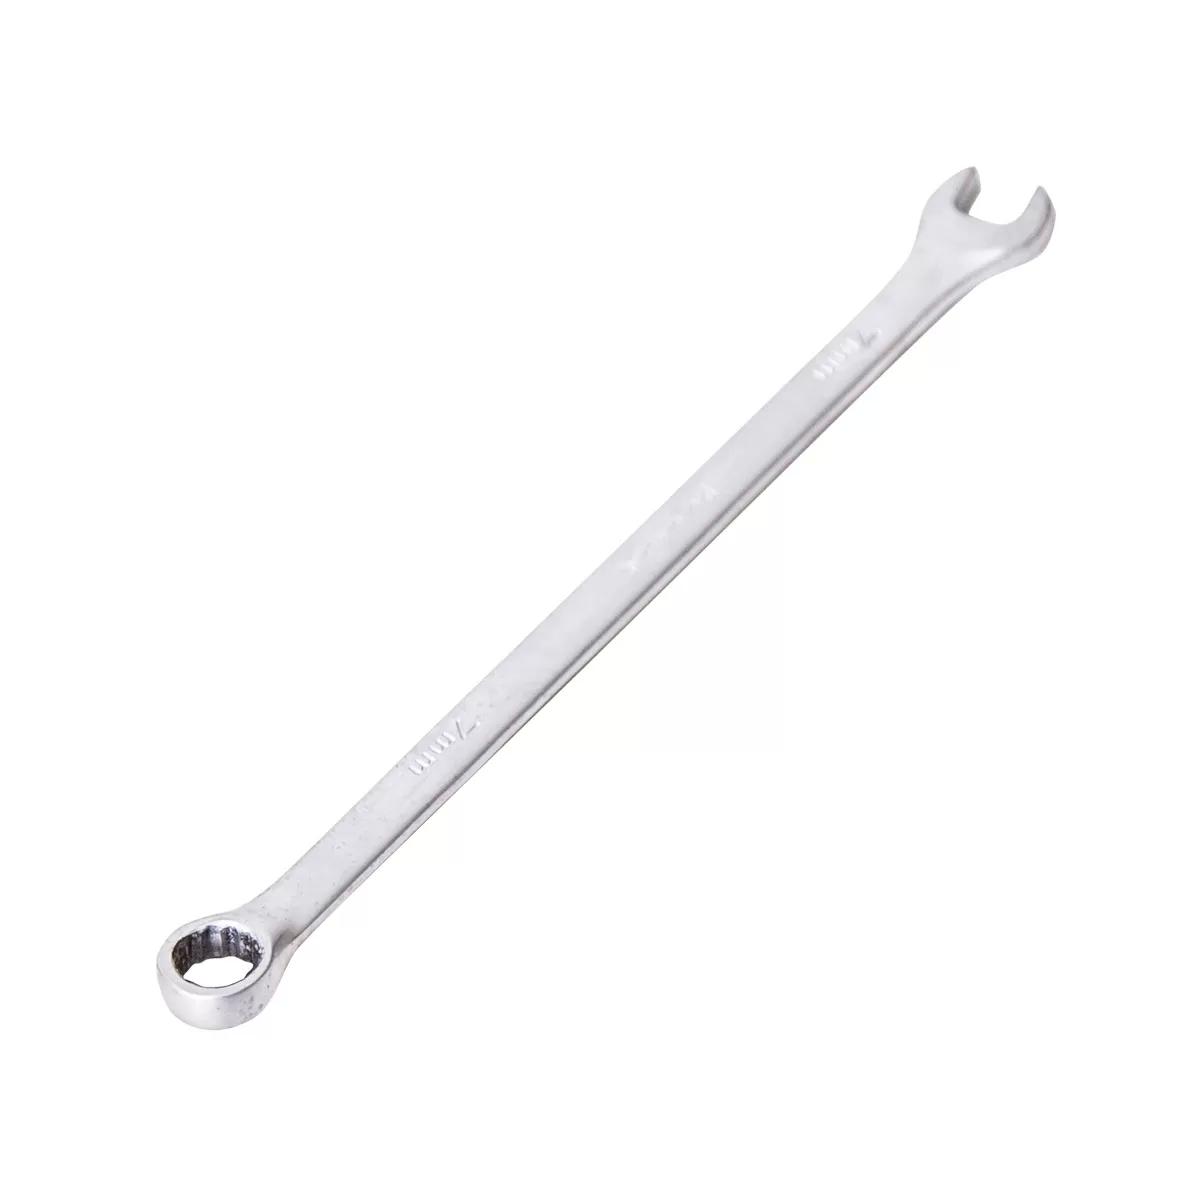 Combination wrench 7mm 